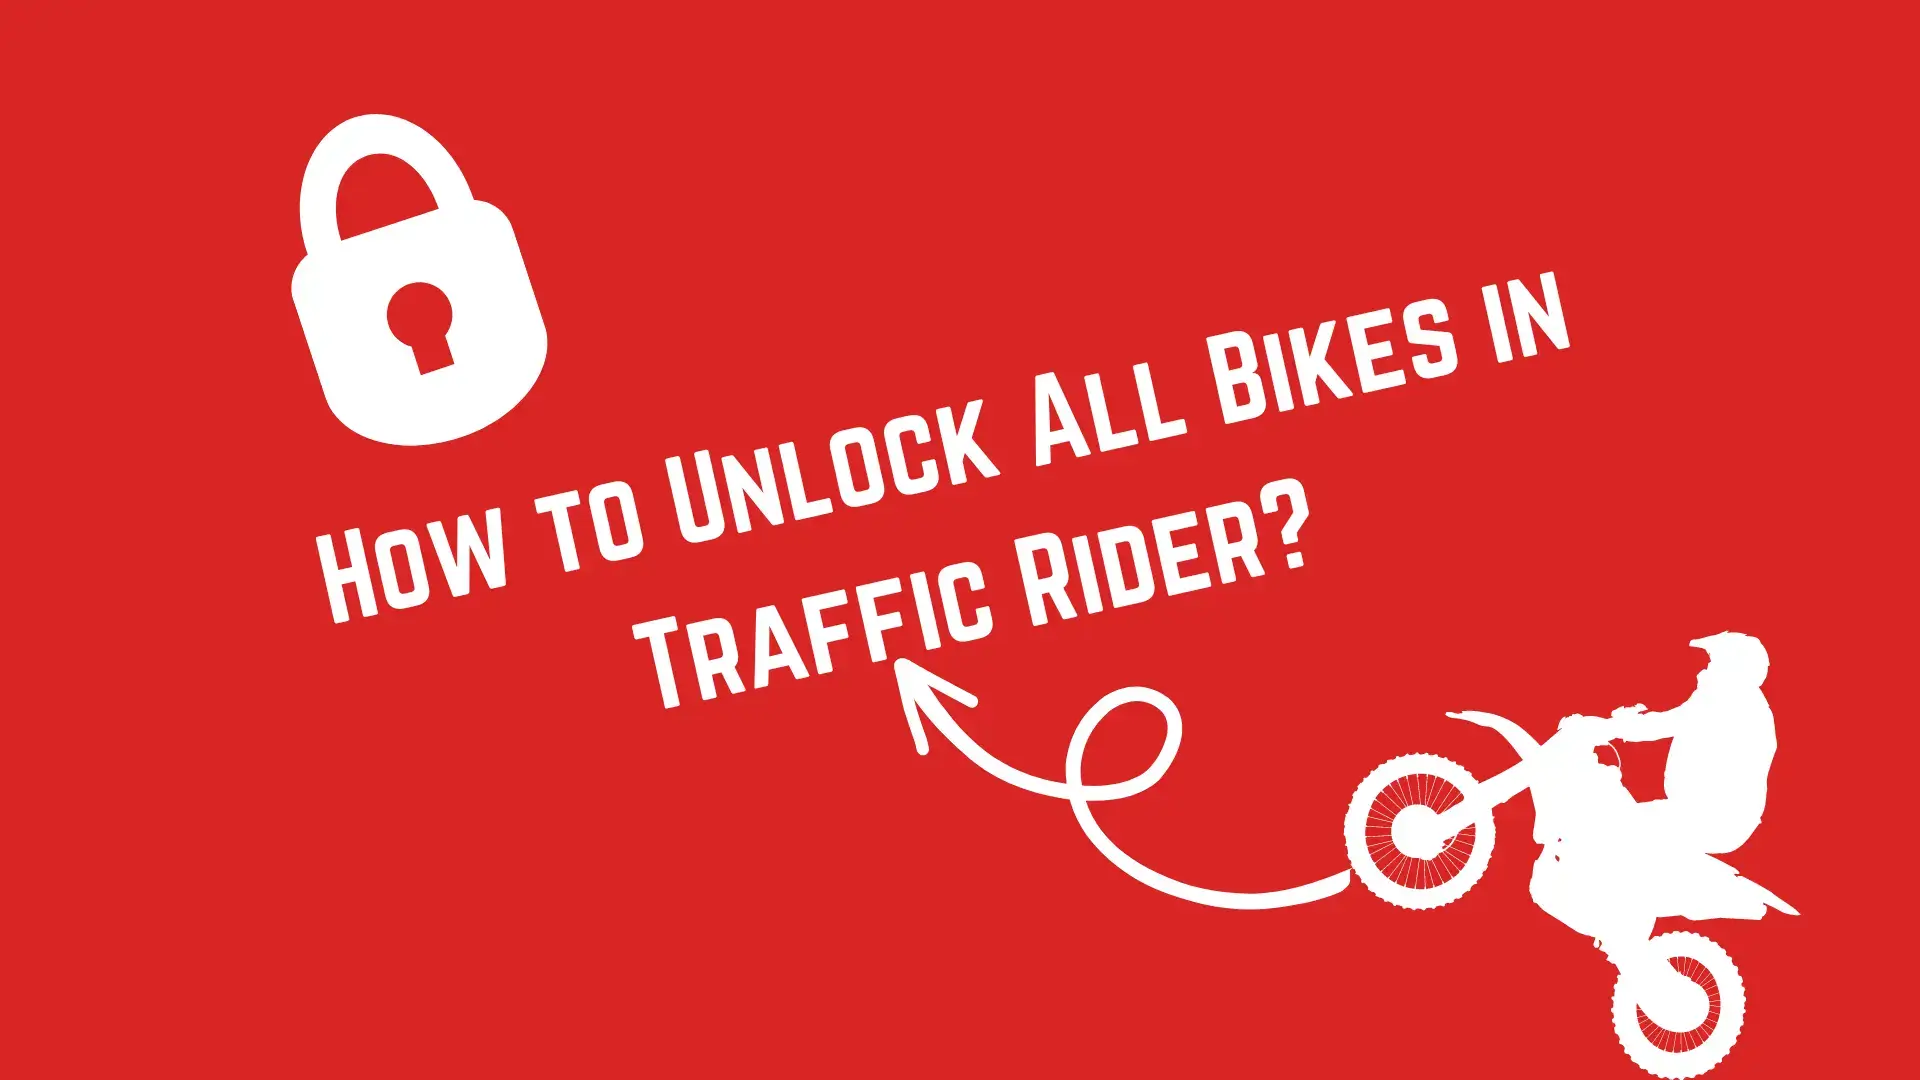 How to Unlock All Bikes in Traffic Rider